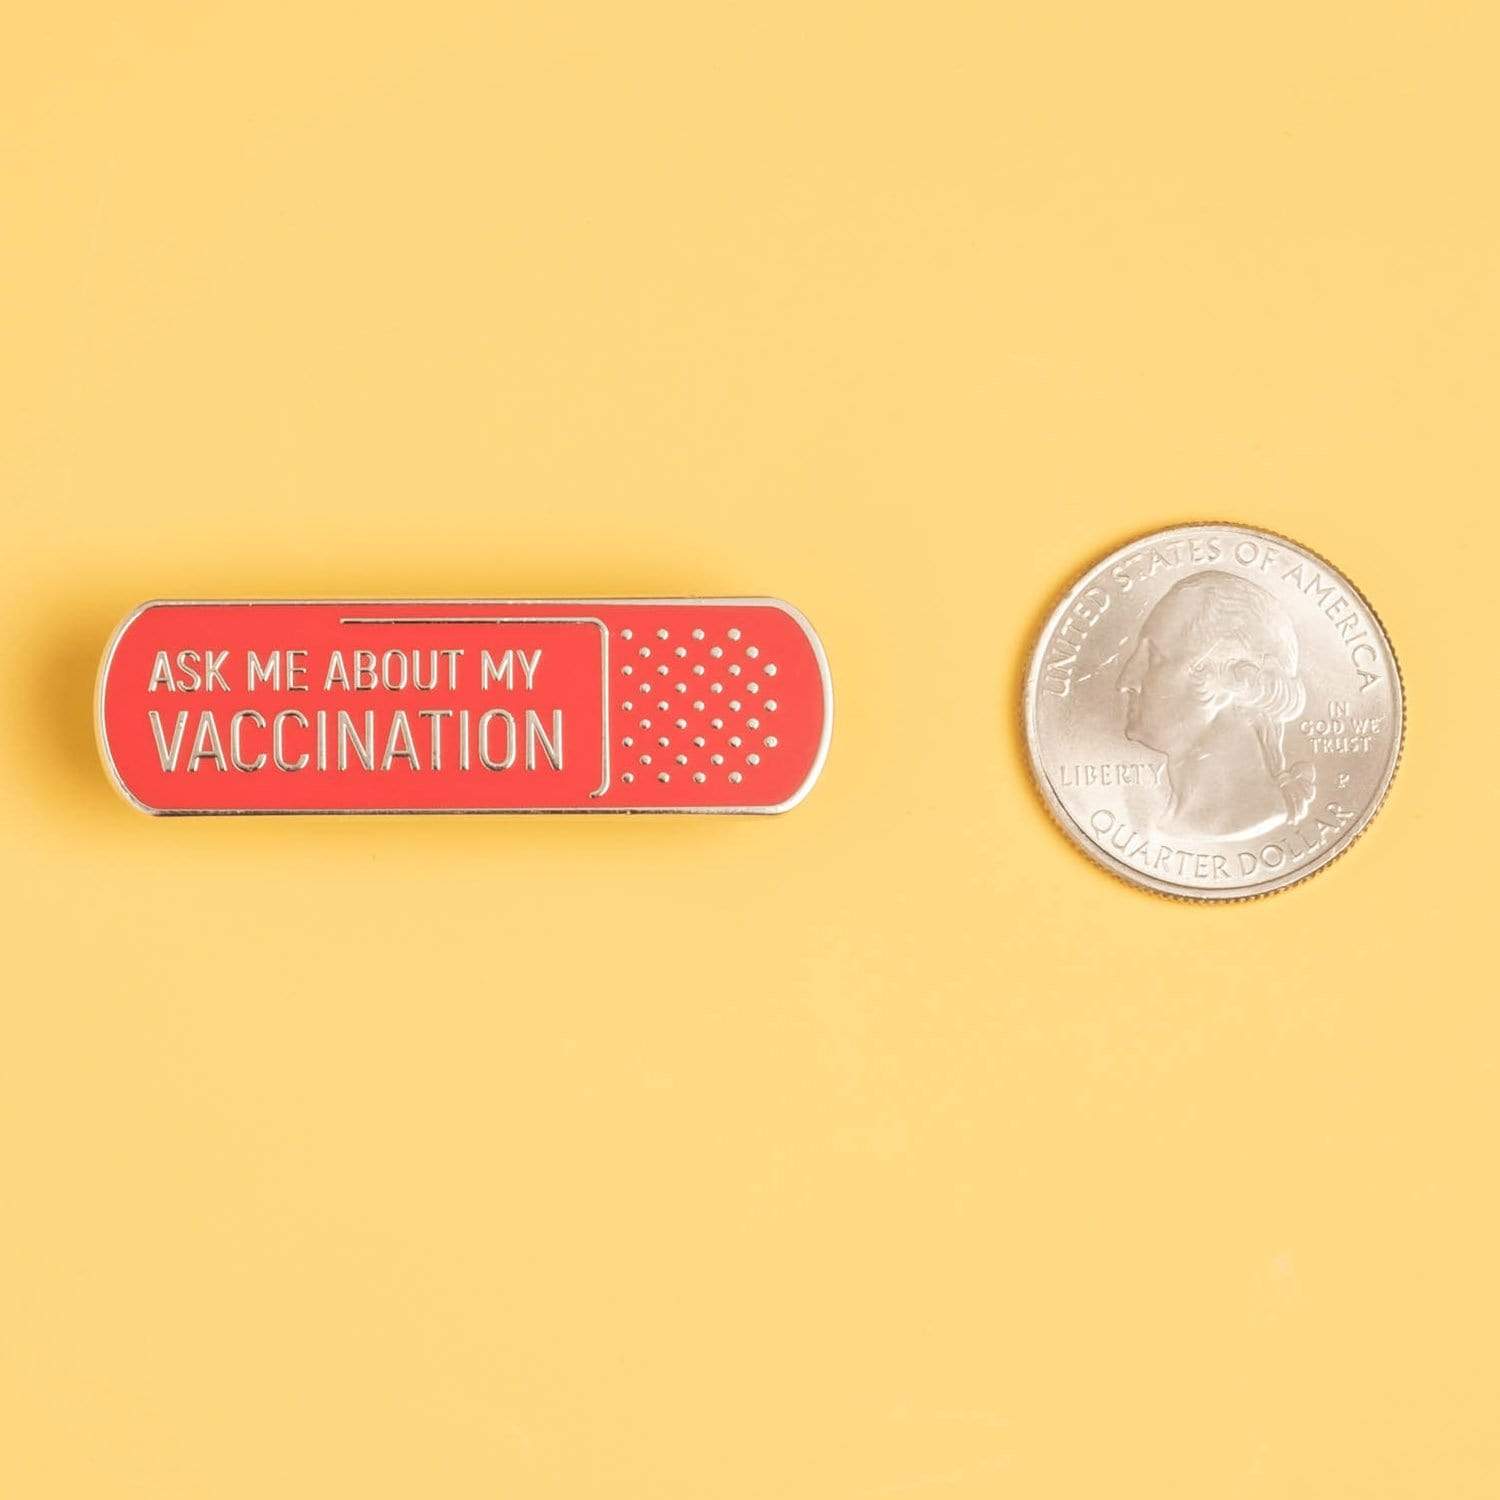 Ask me about my vaccination pin